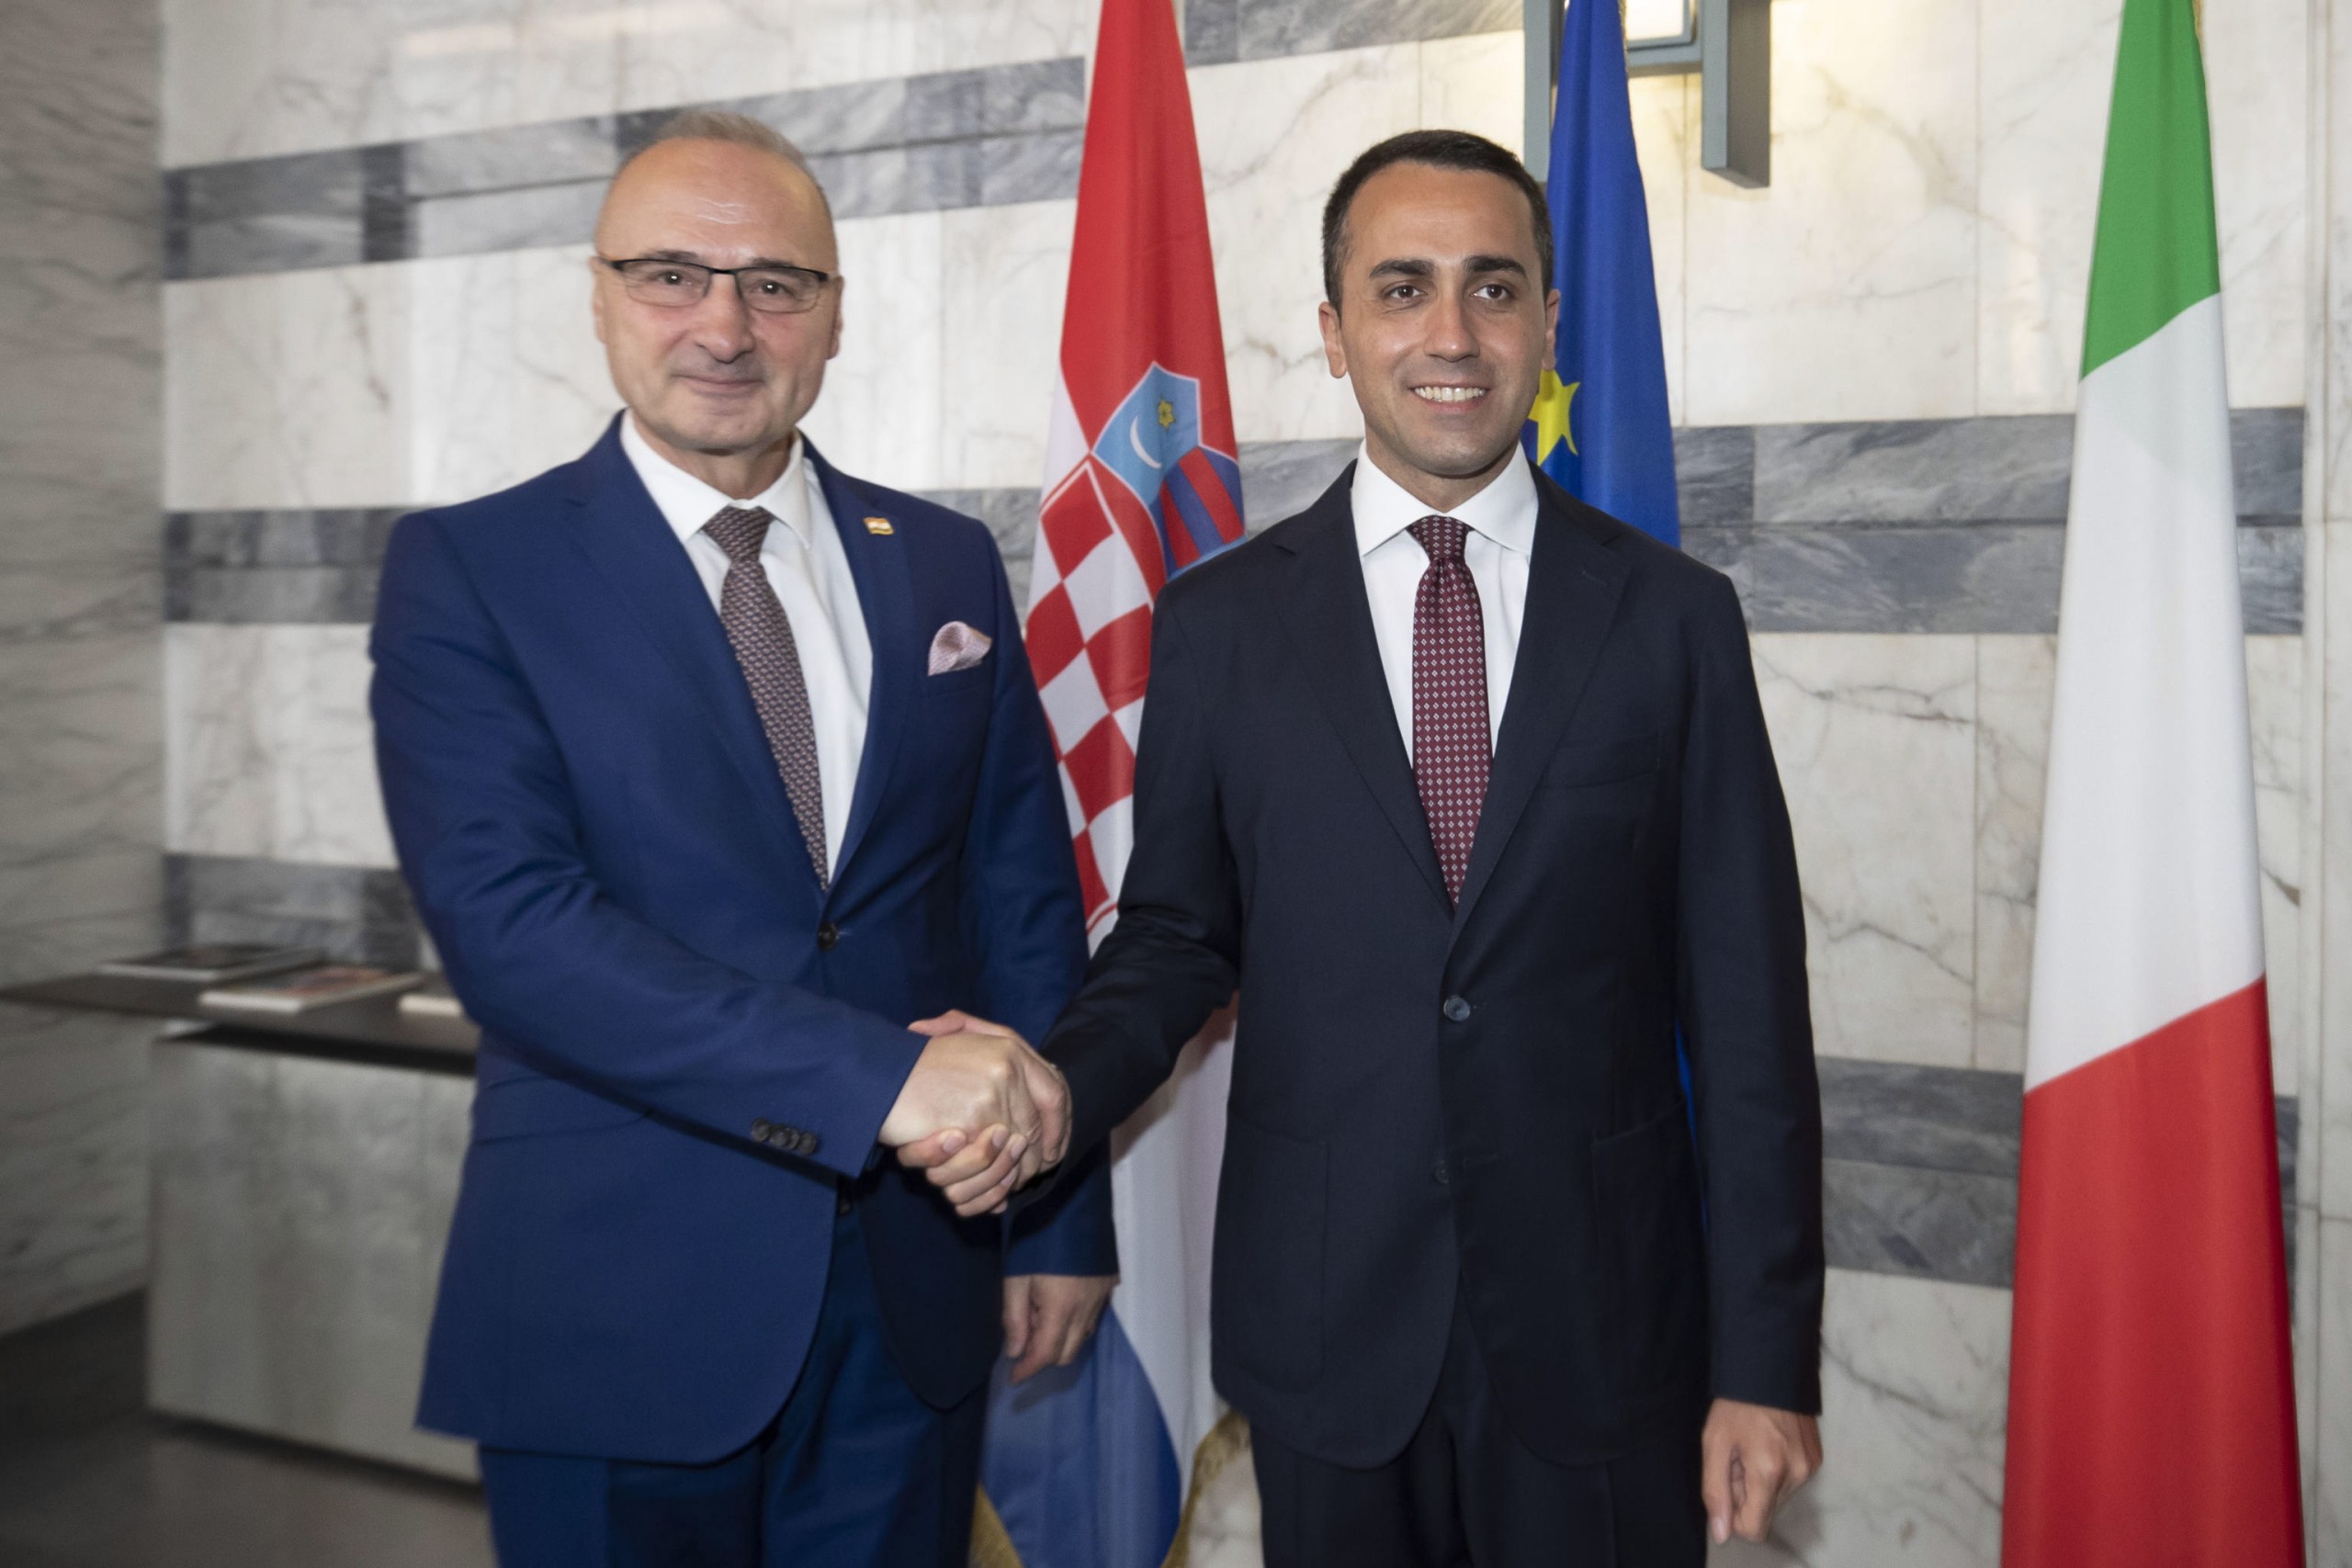 epa09971284 Croatian Foreign Minister Gordan Grlic-Radman and Italian Foreign Minister Luigi Di Maio shake hands during their meeting at the Farnesina government building on the occasion of the 'Italy-Croatia Committee of Ministers' event, in Rome, Italy, 24 May 2022.  EPA/MASSIMO PERCOSSI